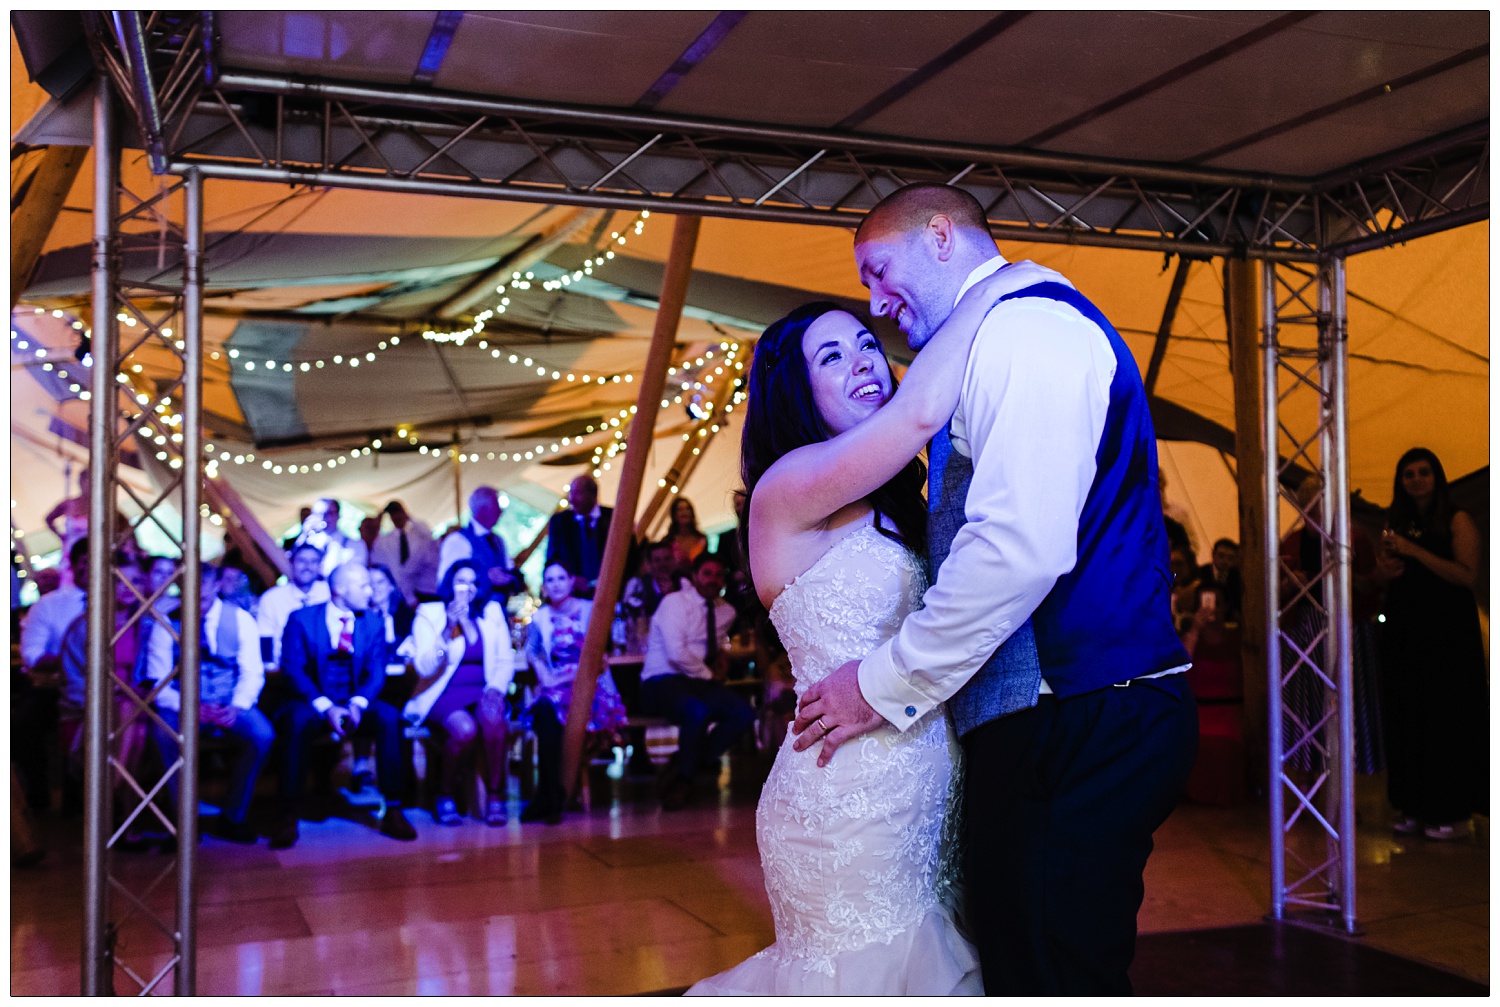 First dance under purple lights. The guests watch from the tables.